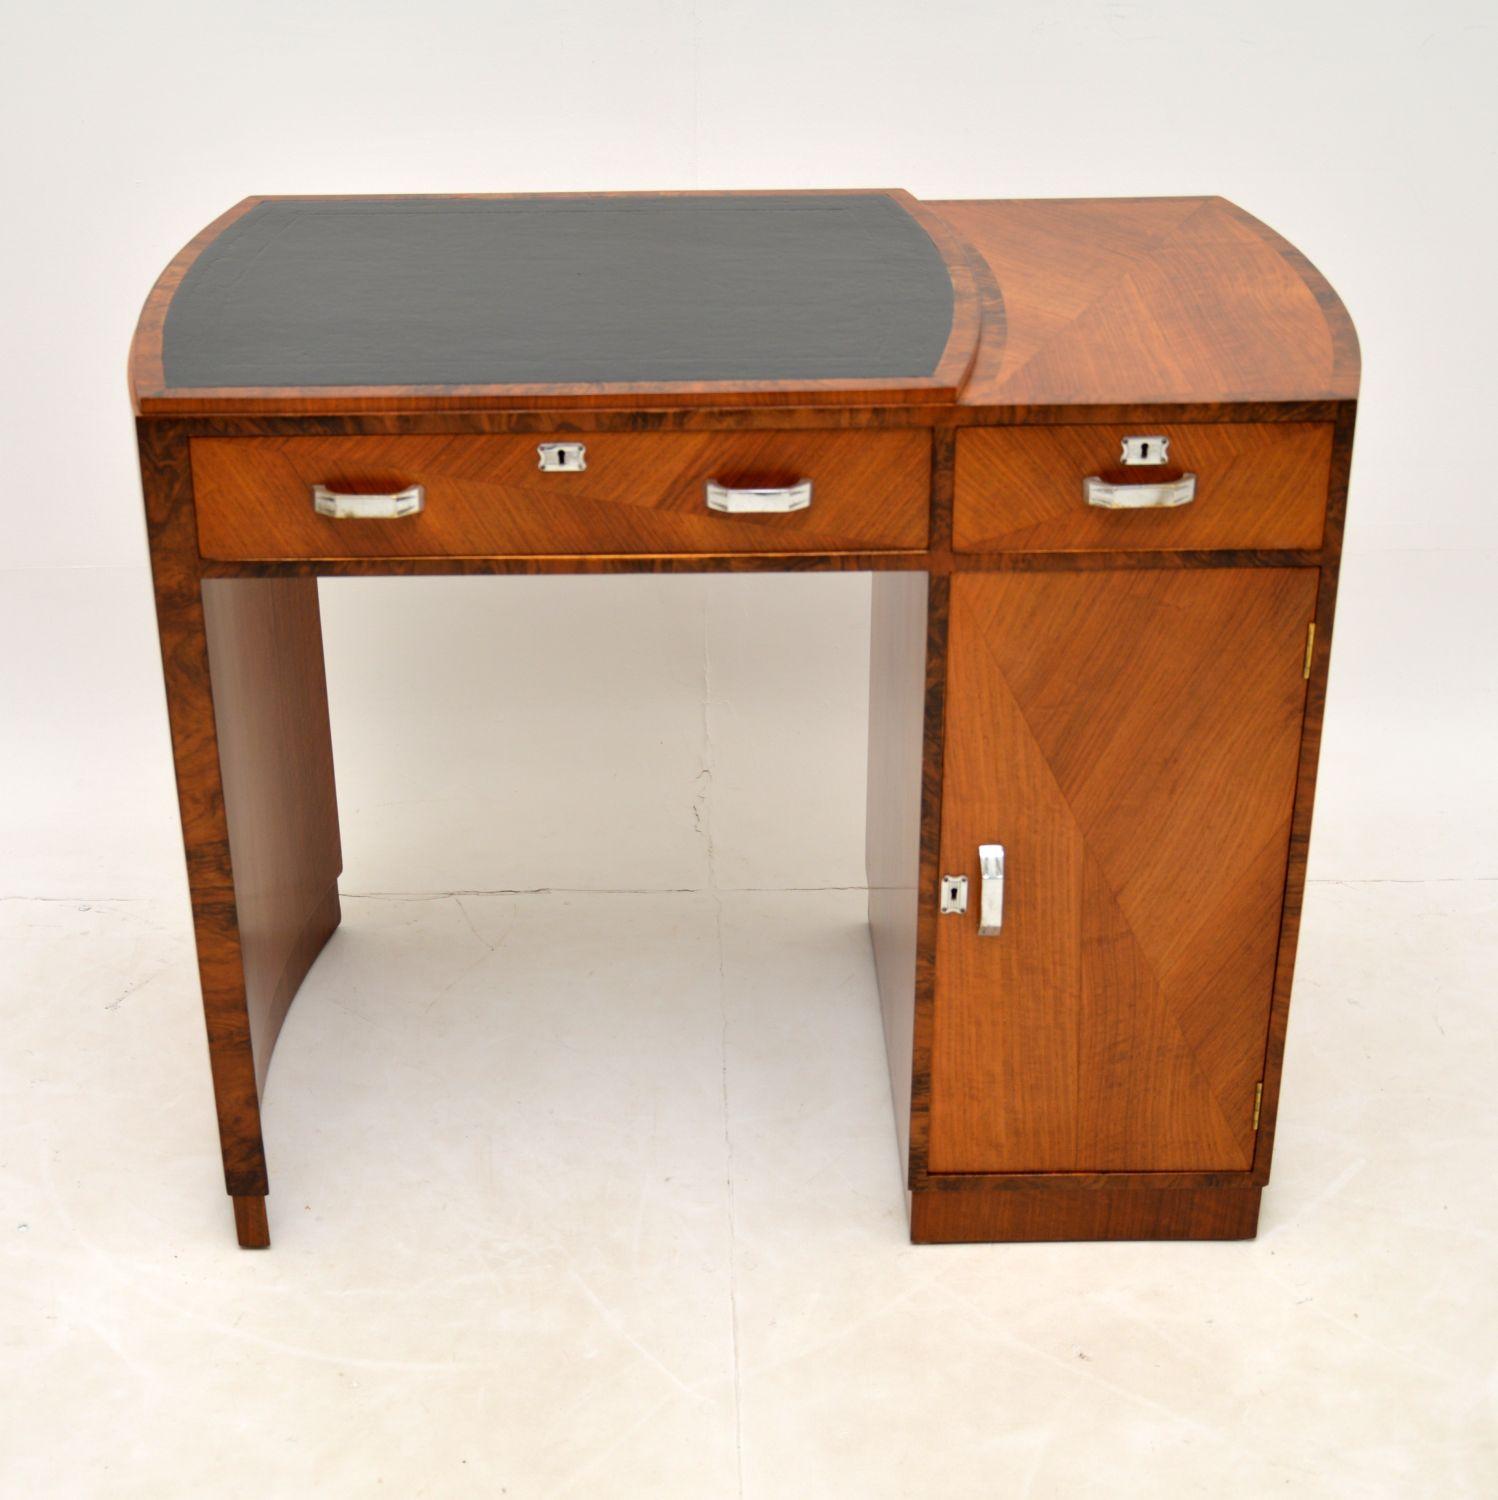 A stunning original Art Deco period desk in walnut and leather. This was made in England, it dates from the 1920-30’s.

It is an unusual design, with a nice and compact size, the quality is absolutely amazing. The sides are curved and this has a